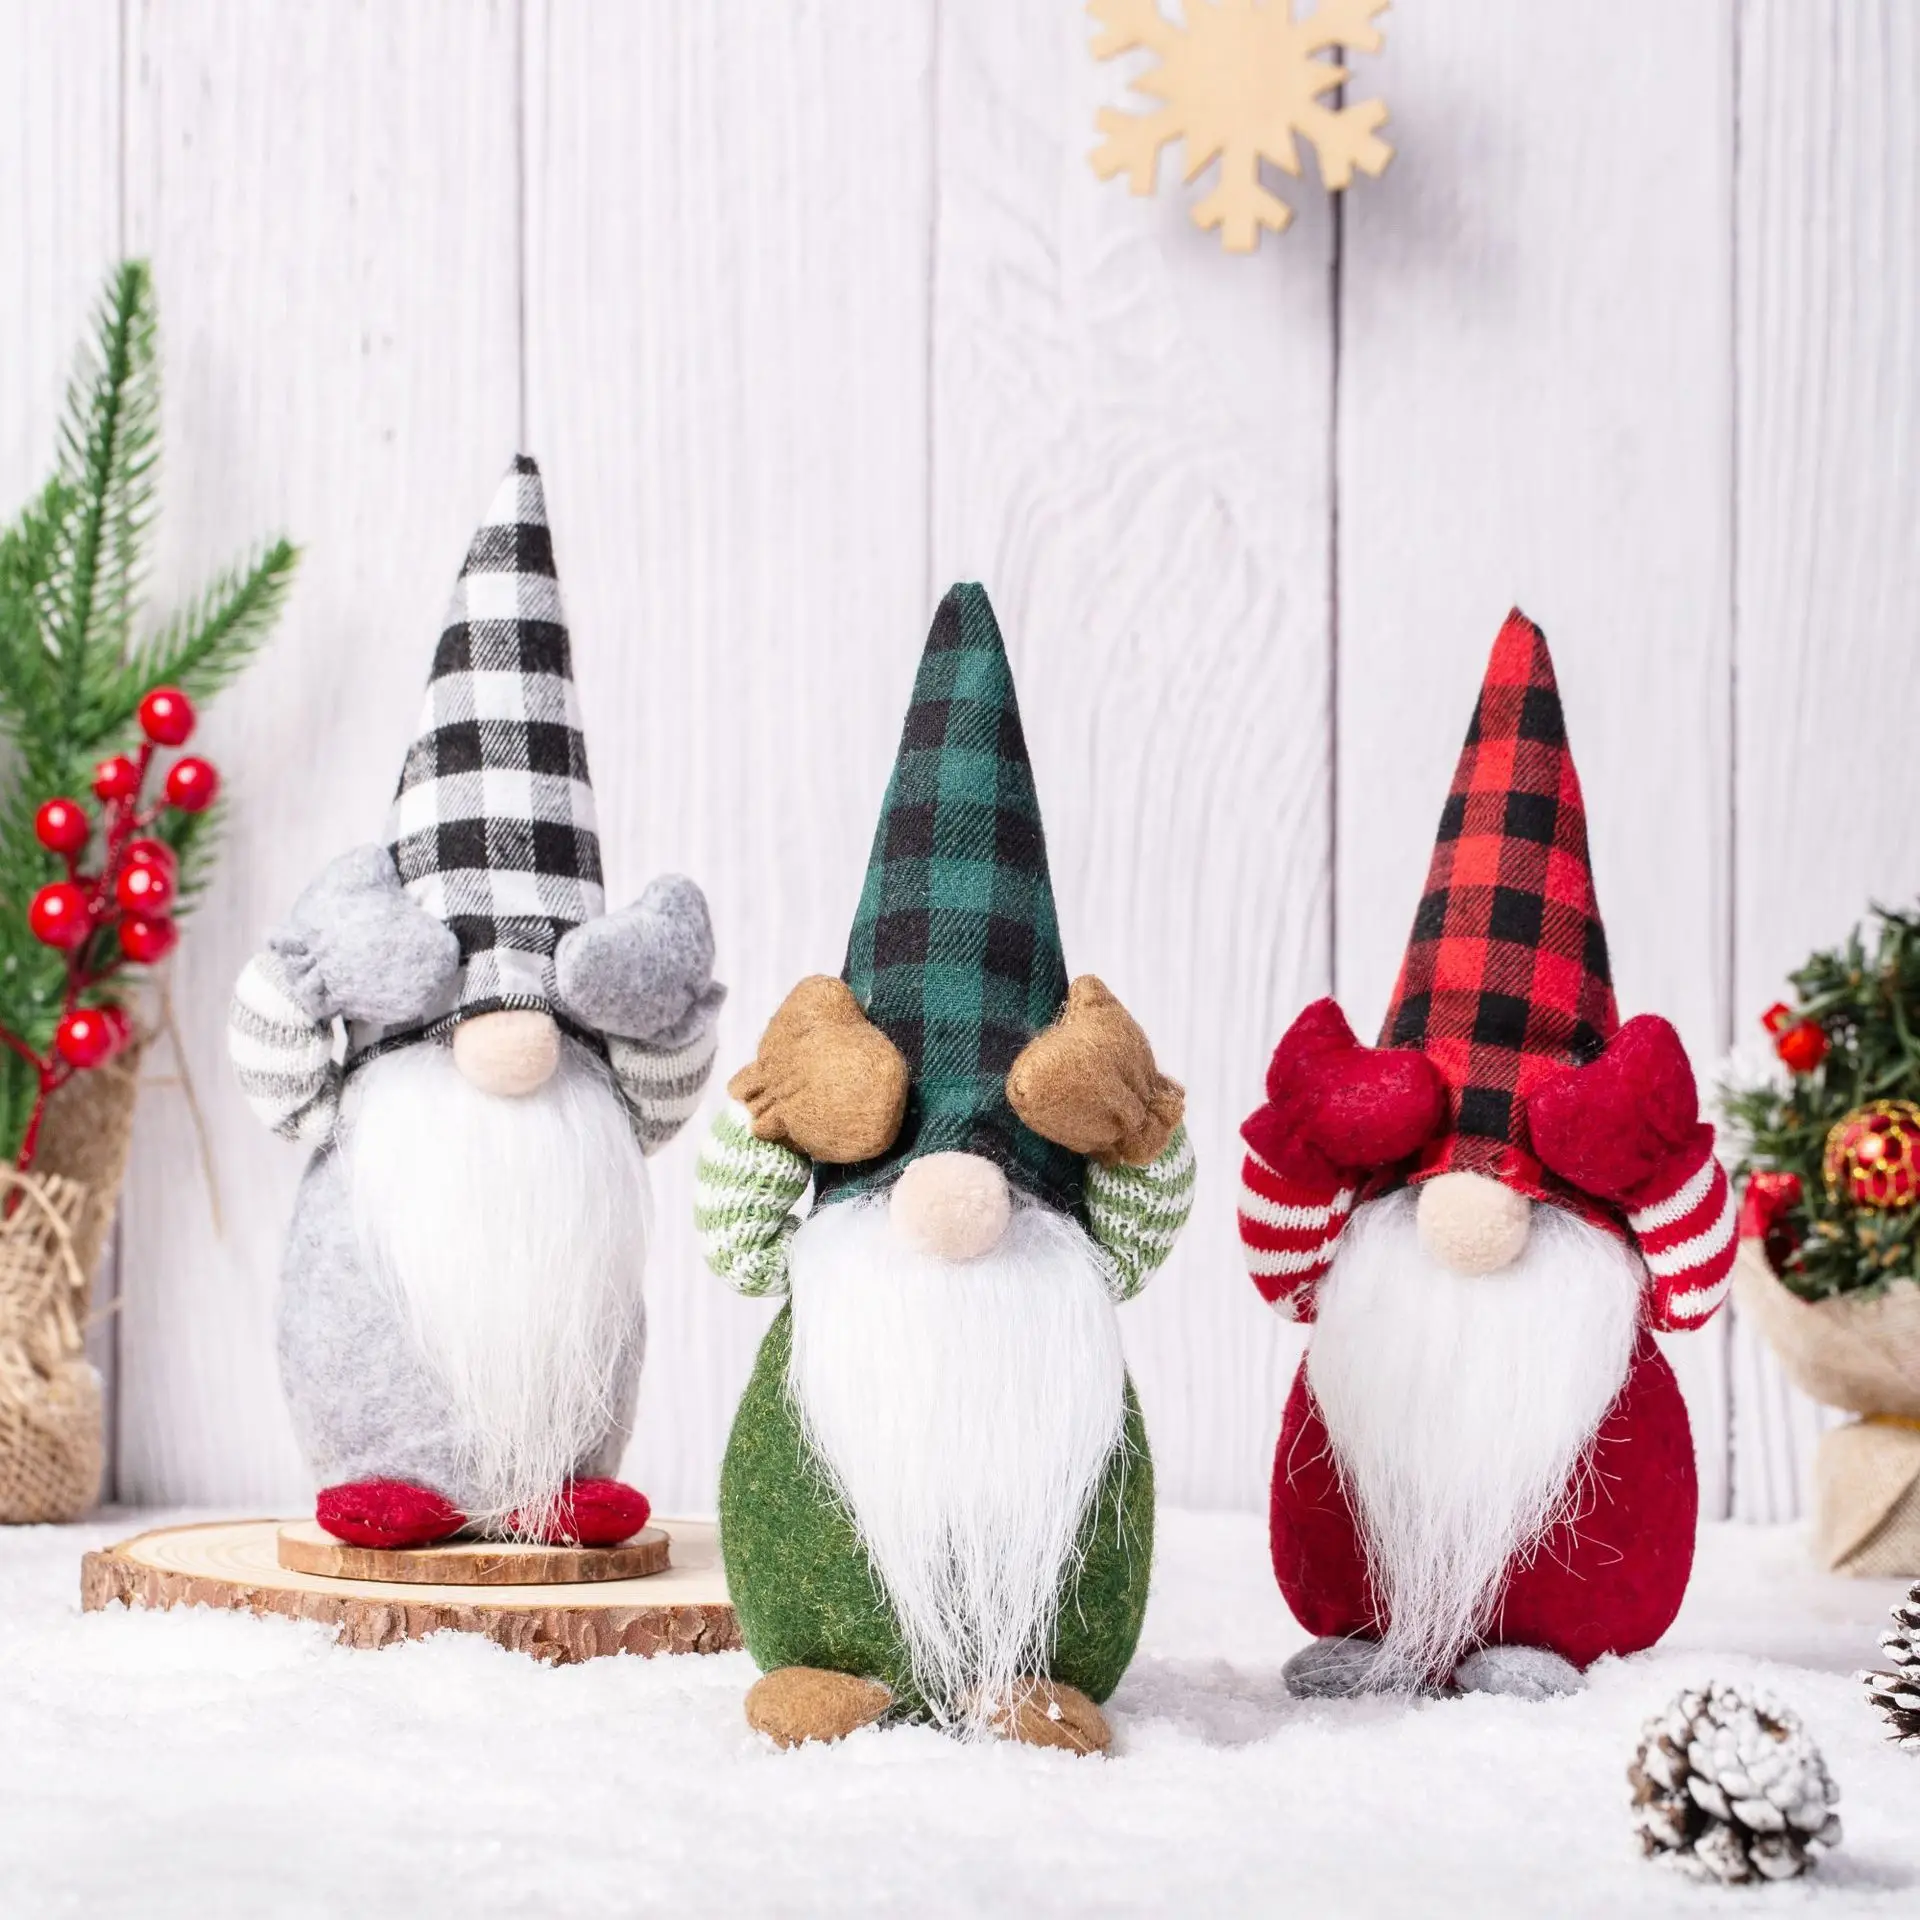 

Standing Christmas Gnome,Swedish Tomte Stuffed Plush Knitted Hat Scandinavian Christmas Decorations Ornaments Holiday Home Decor